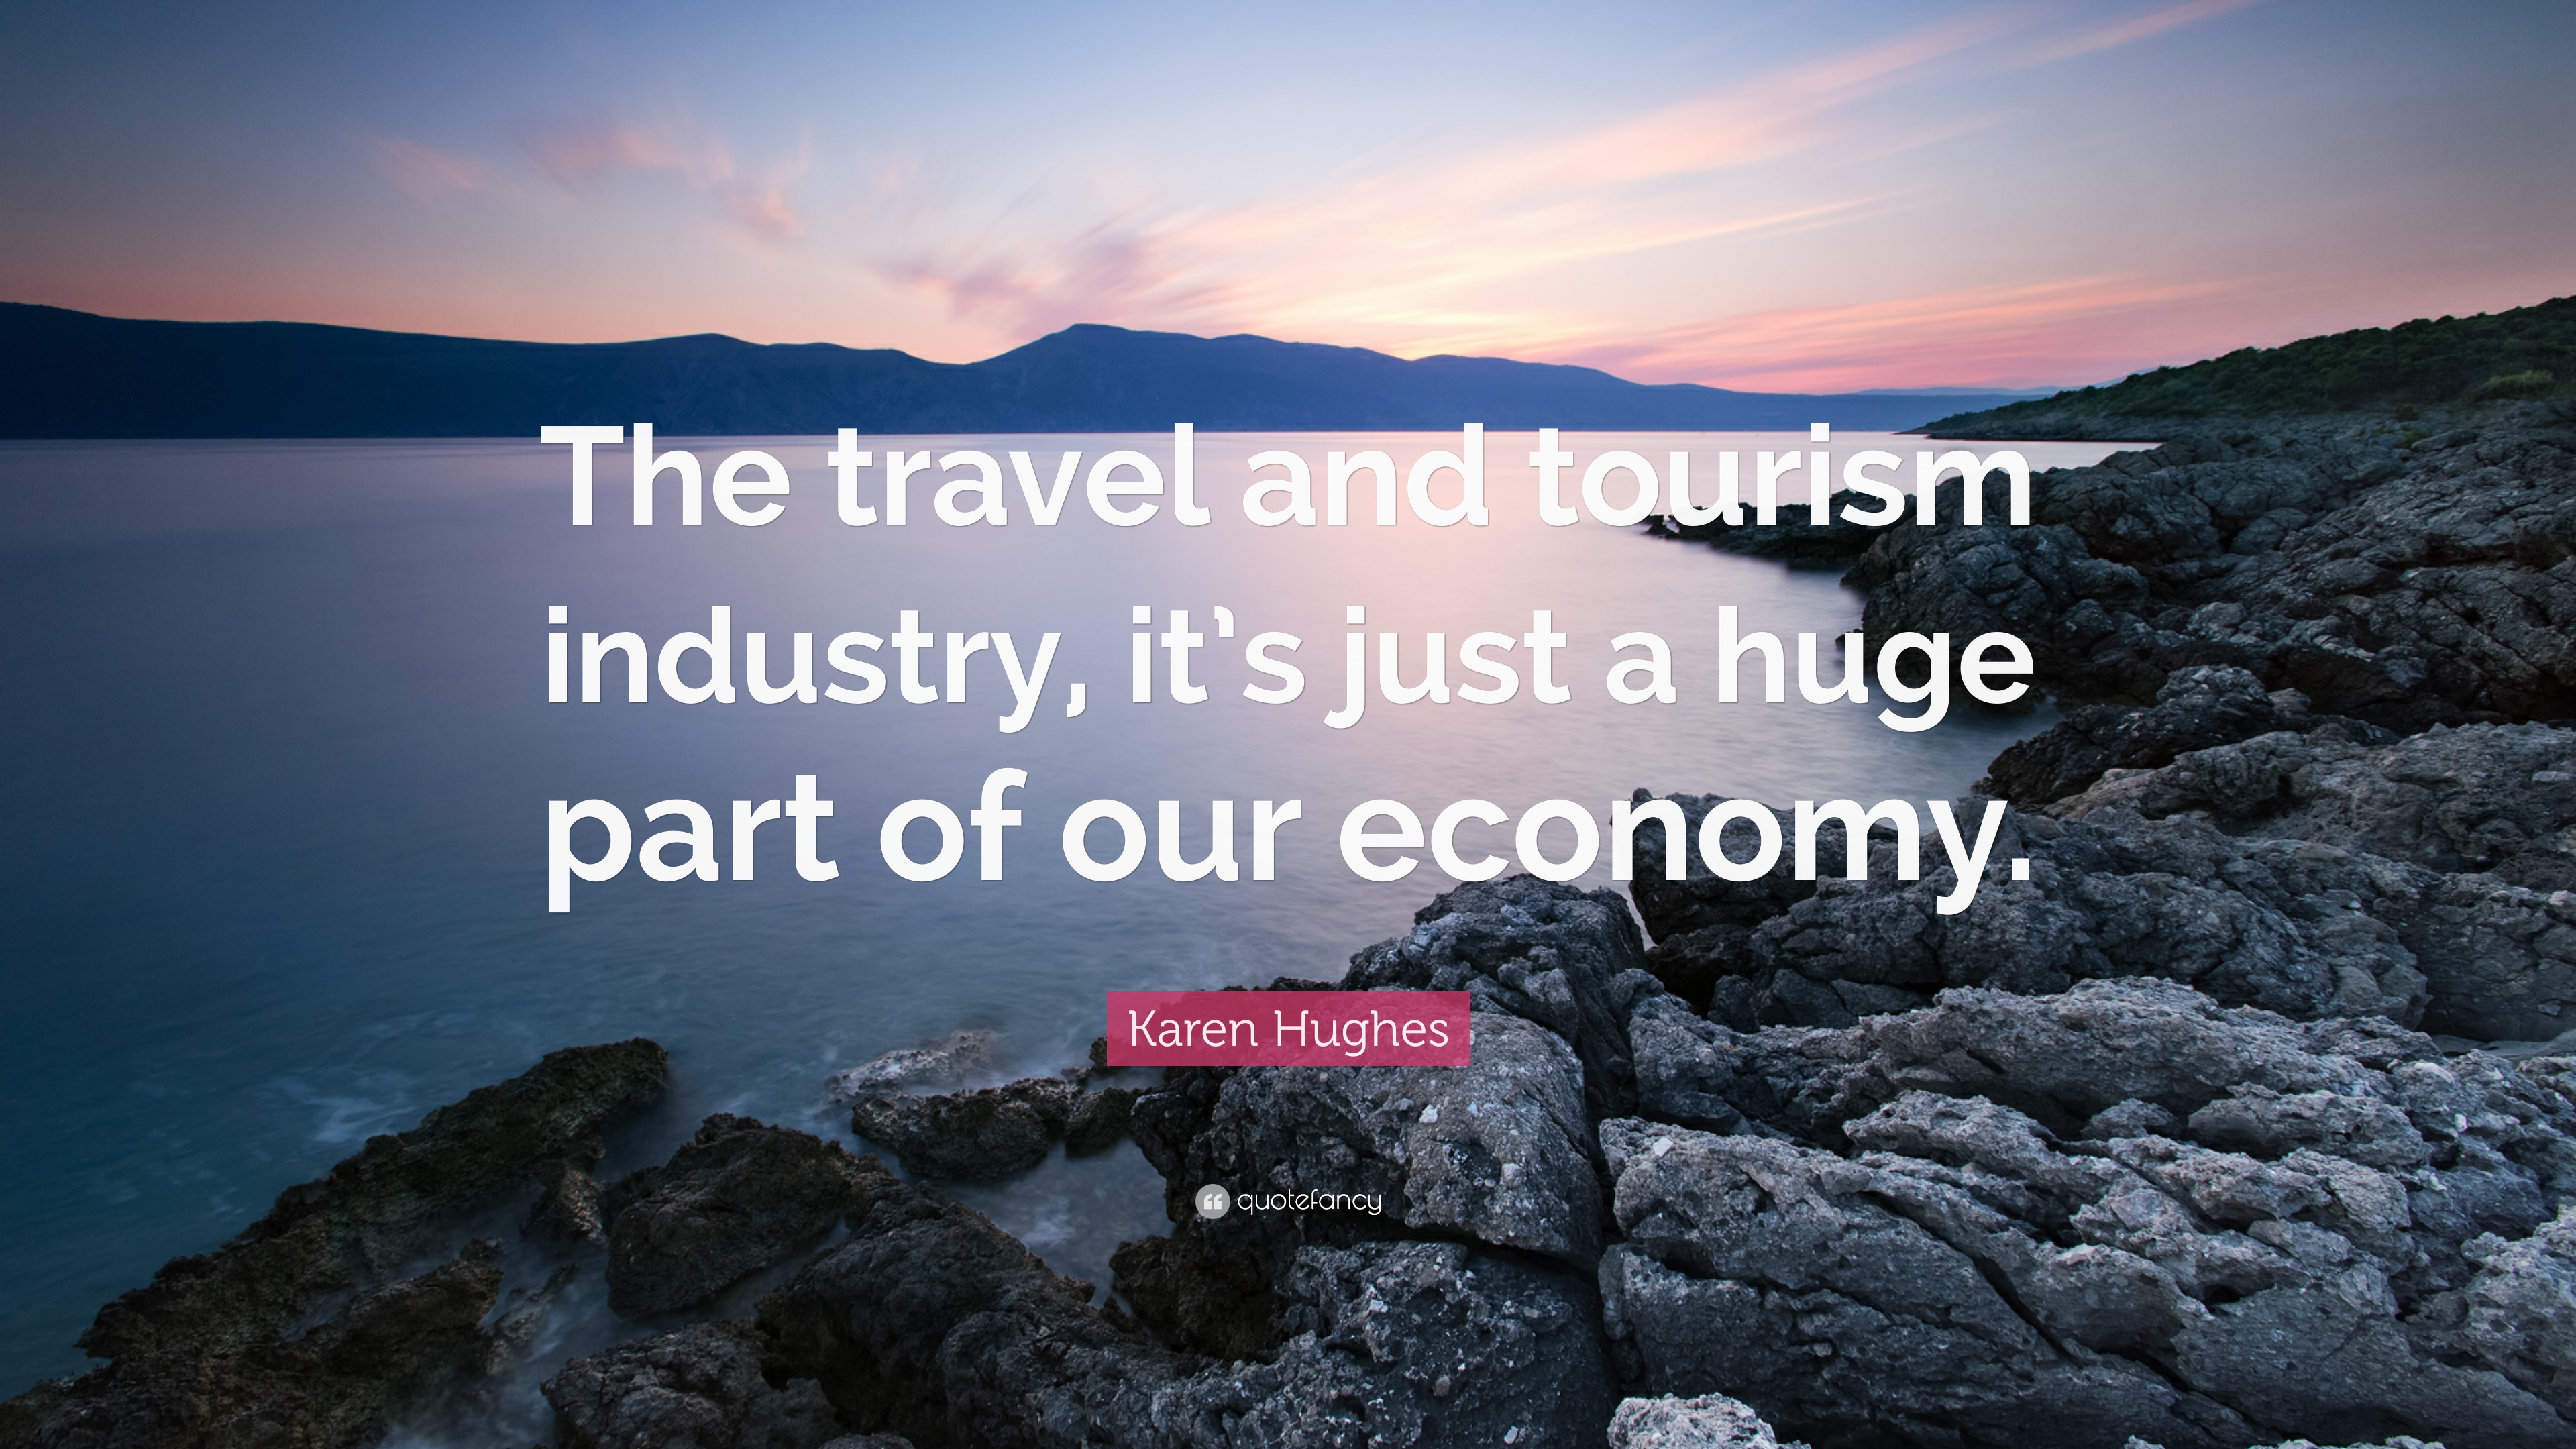 Karen Hughes Quote: “The travel and tourism industry, it's